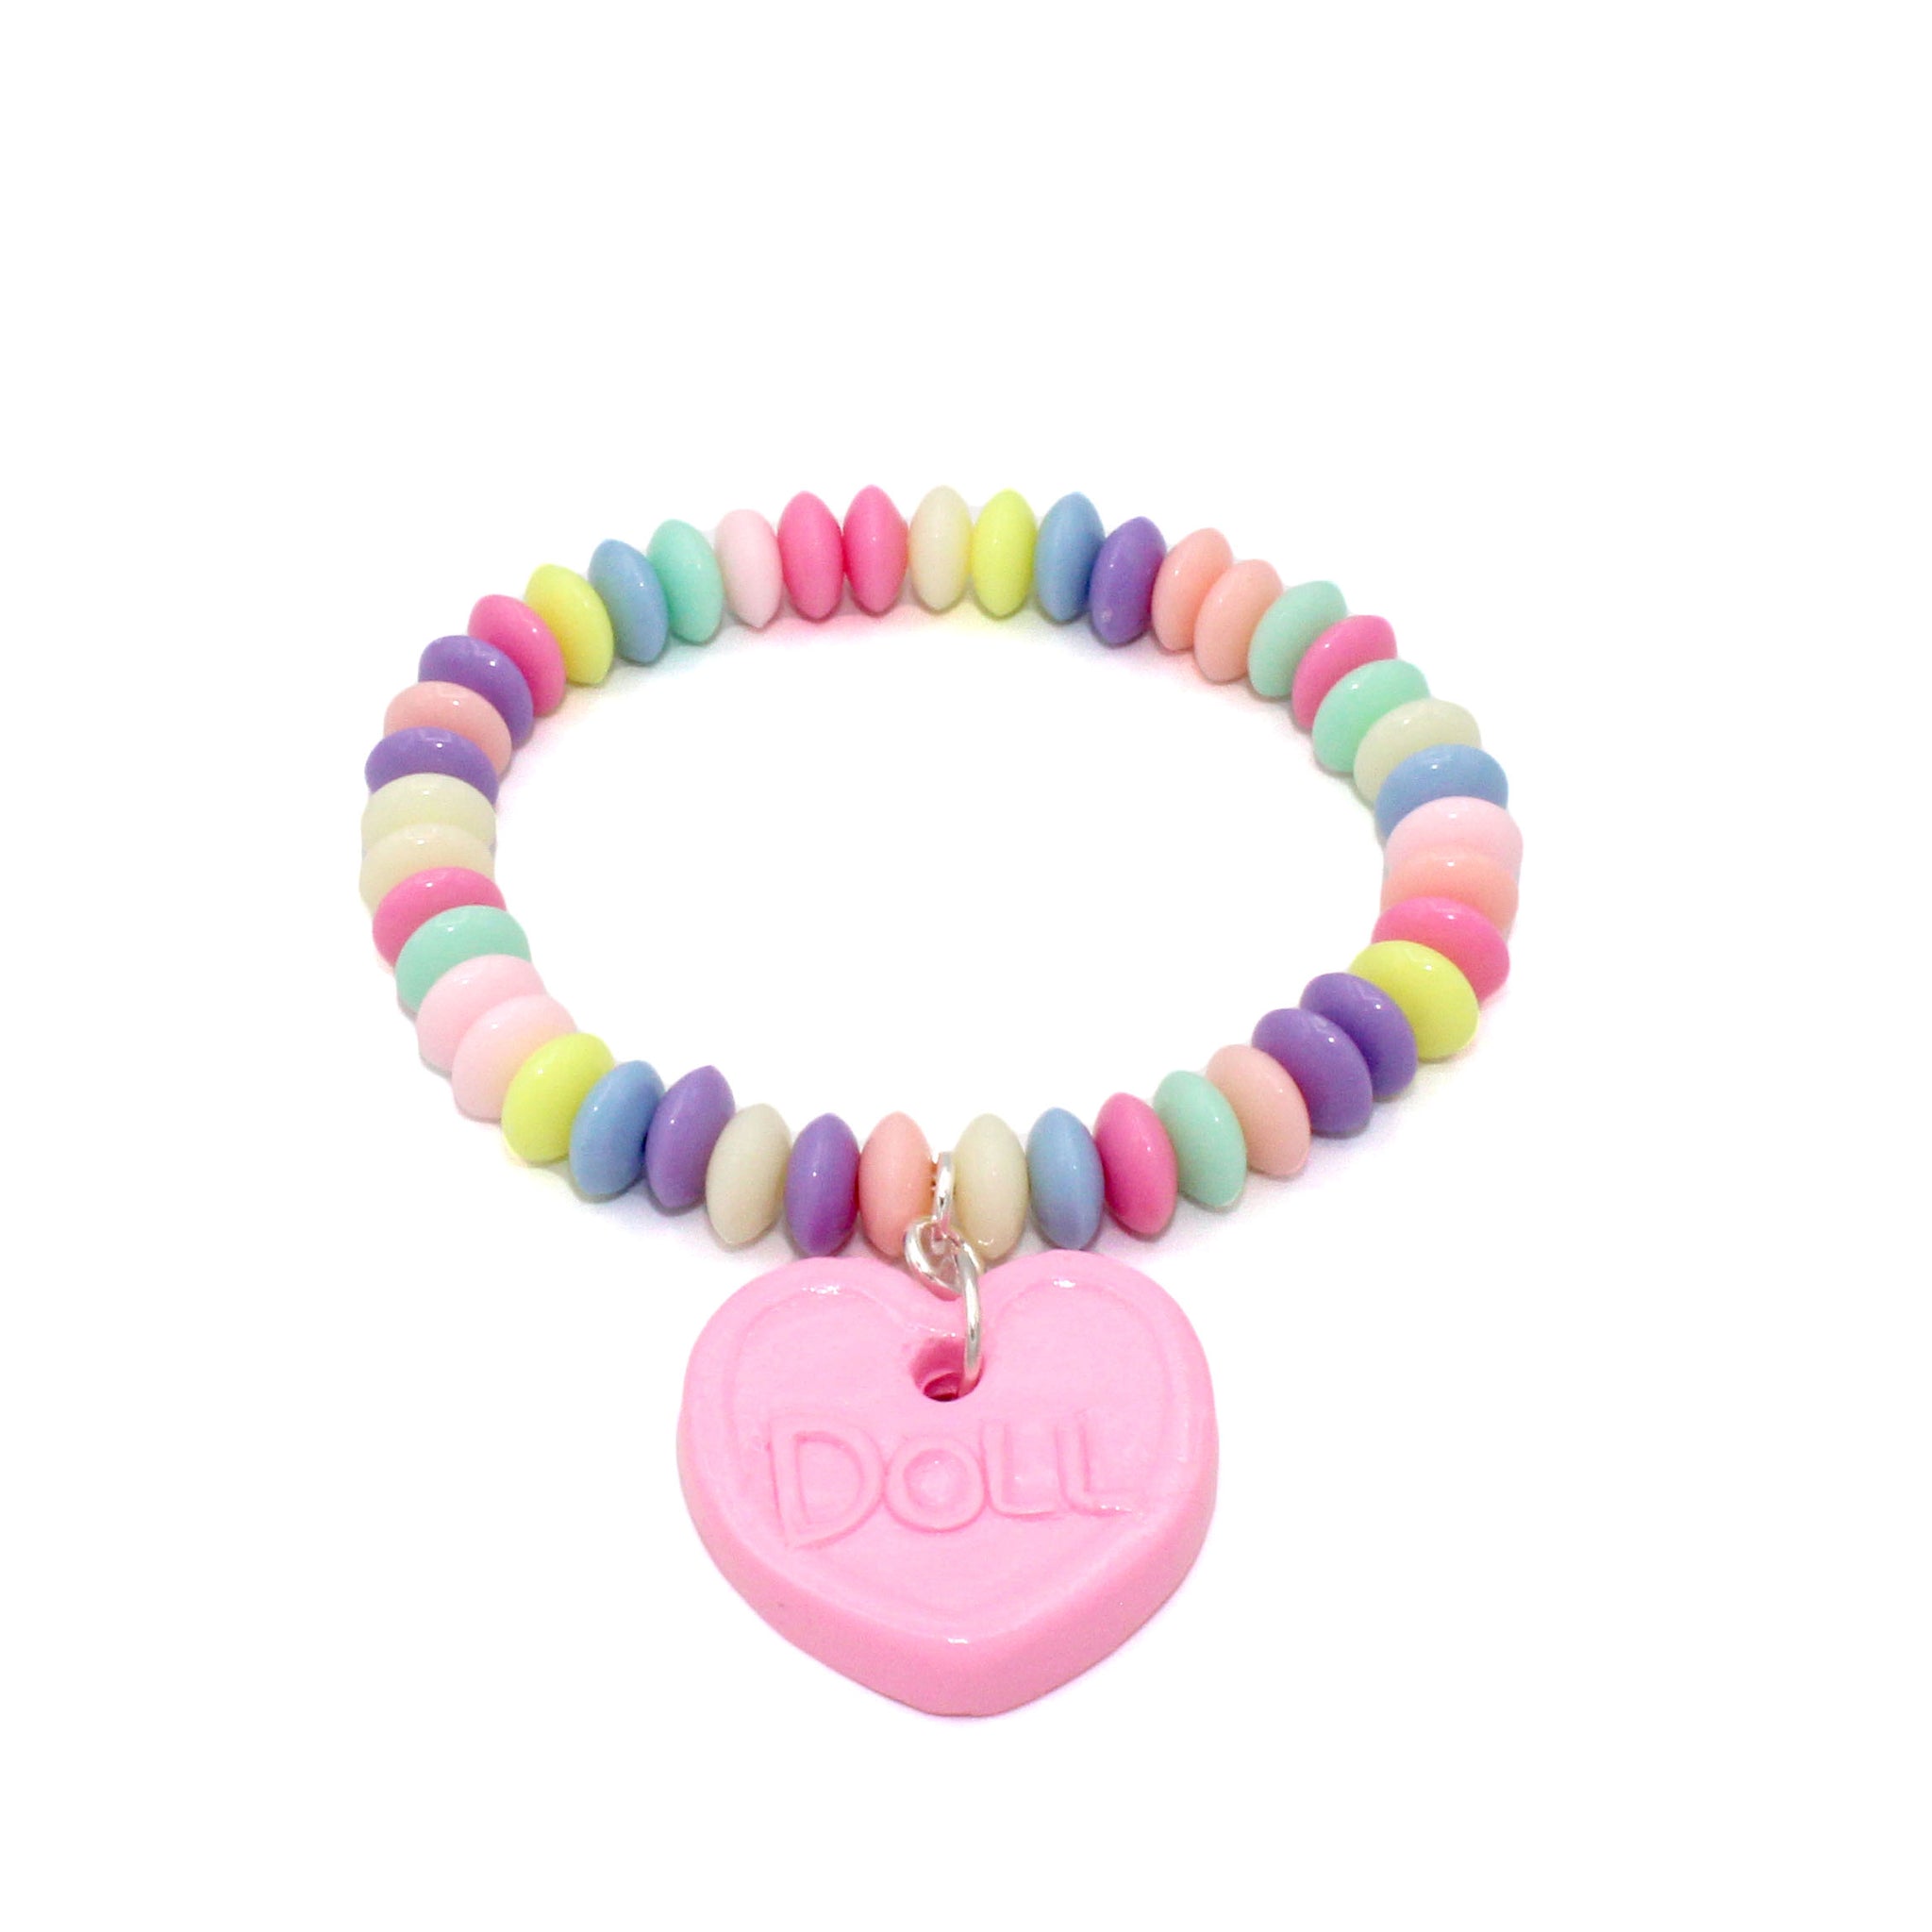 Stretchable Candy Bracelet, Multicolor Fruit-Flavored Chewables for Party  Favors (24-Pack) 